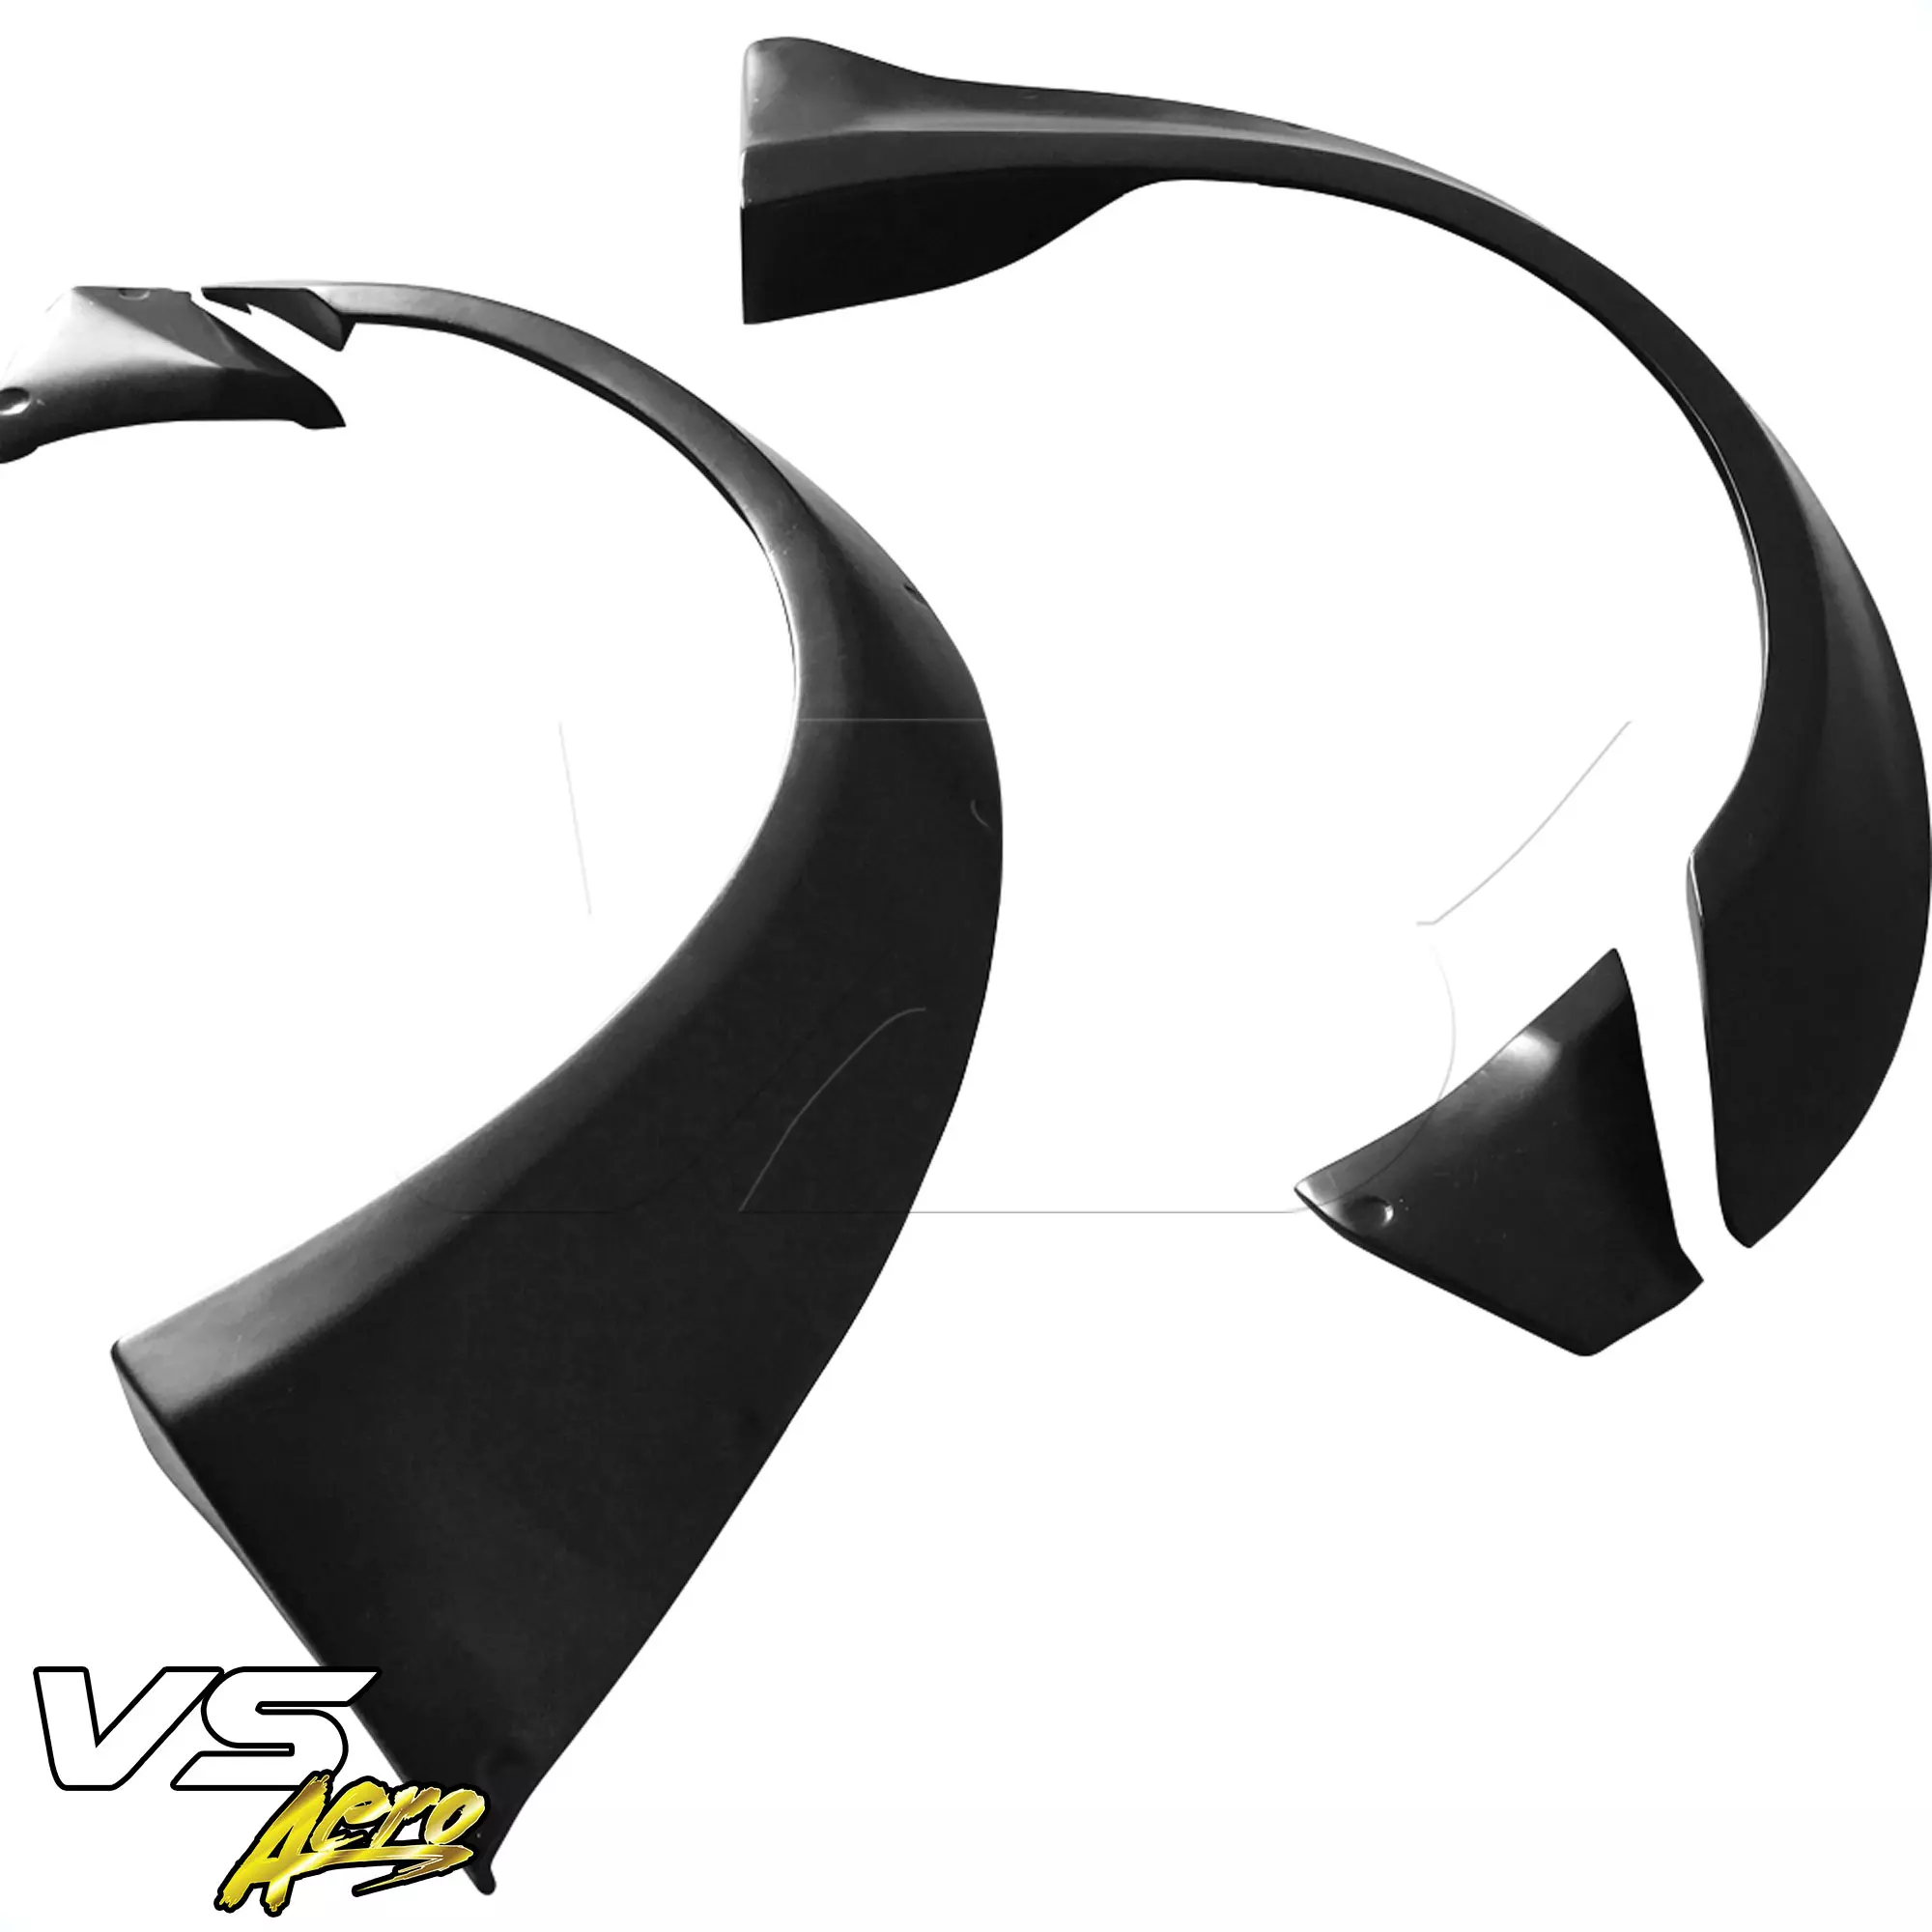 VSaero FRP LBPE Wide Body Fender Flares (front) 4pc > Infiniti G37 Coupe 2008-2015 > 2dr Coupe - Image 16